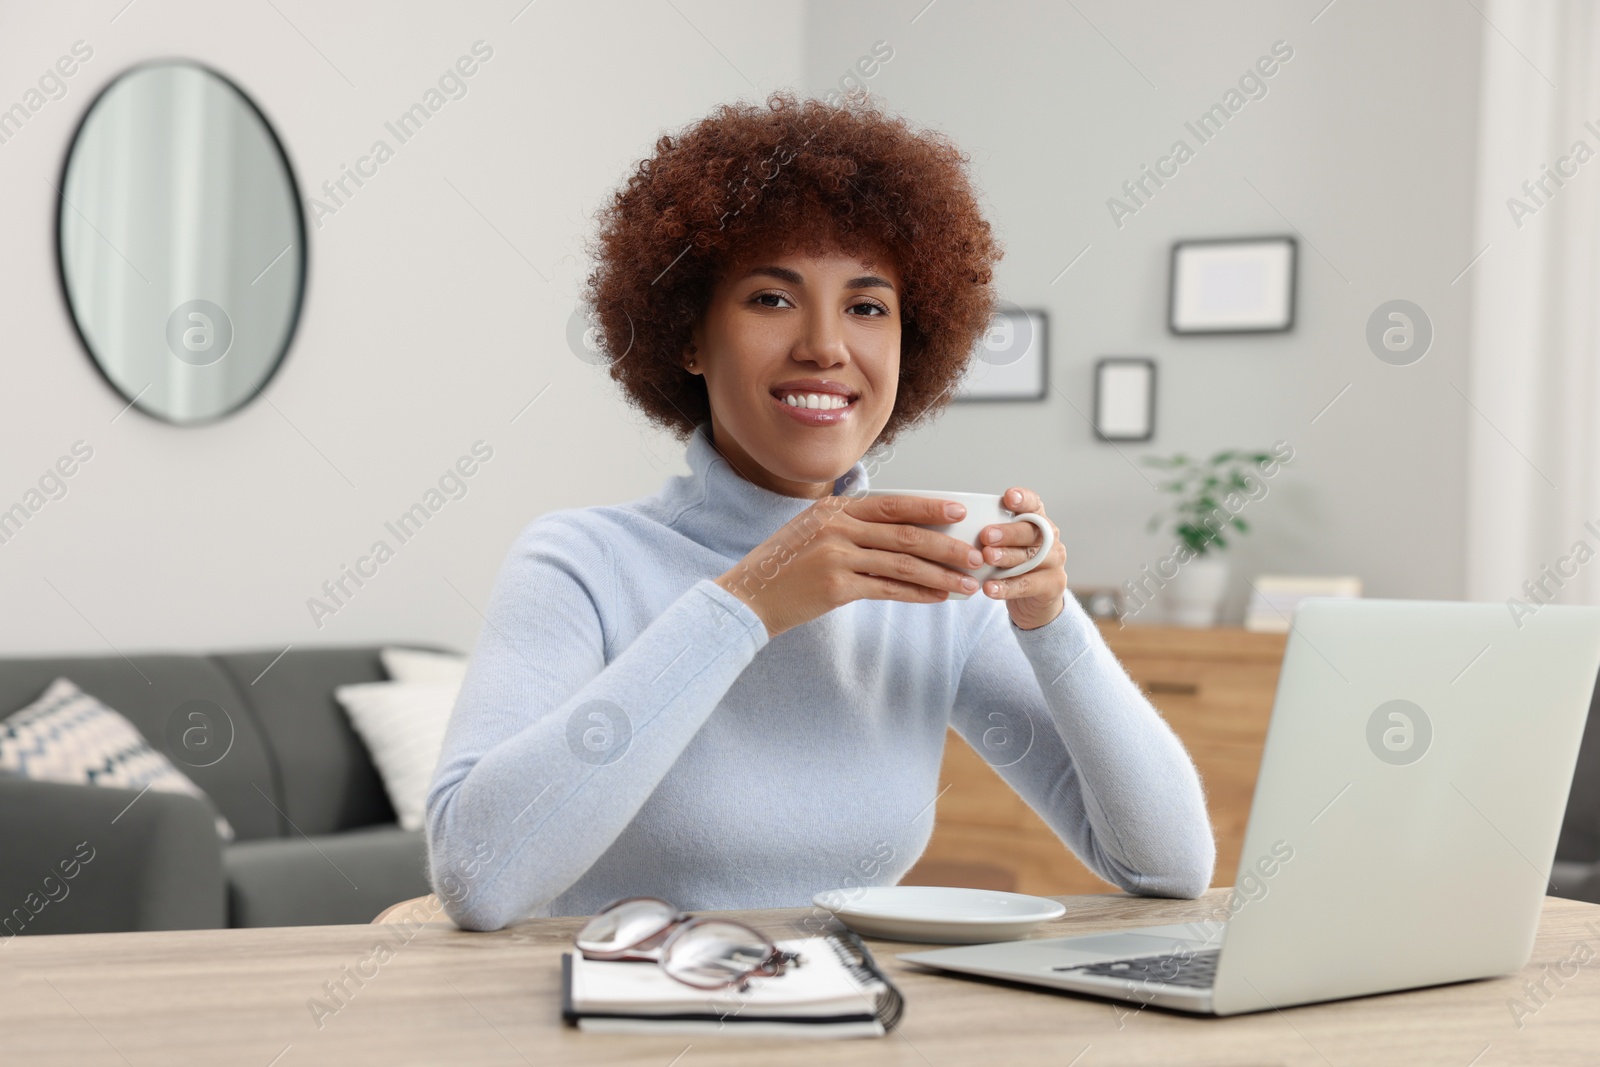 Photo of Beautiful young woman using laptop and drinking coffee at wooden desk in room